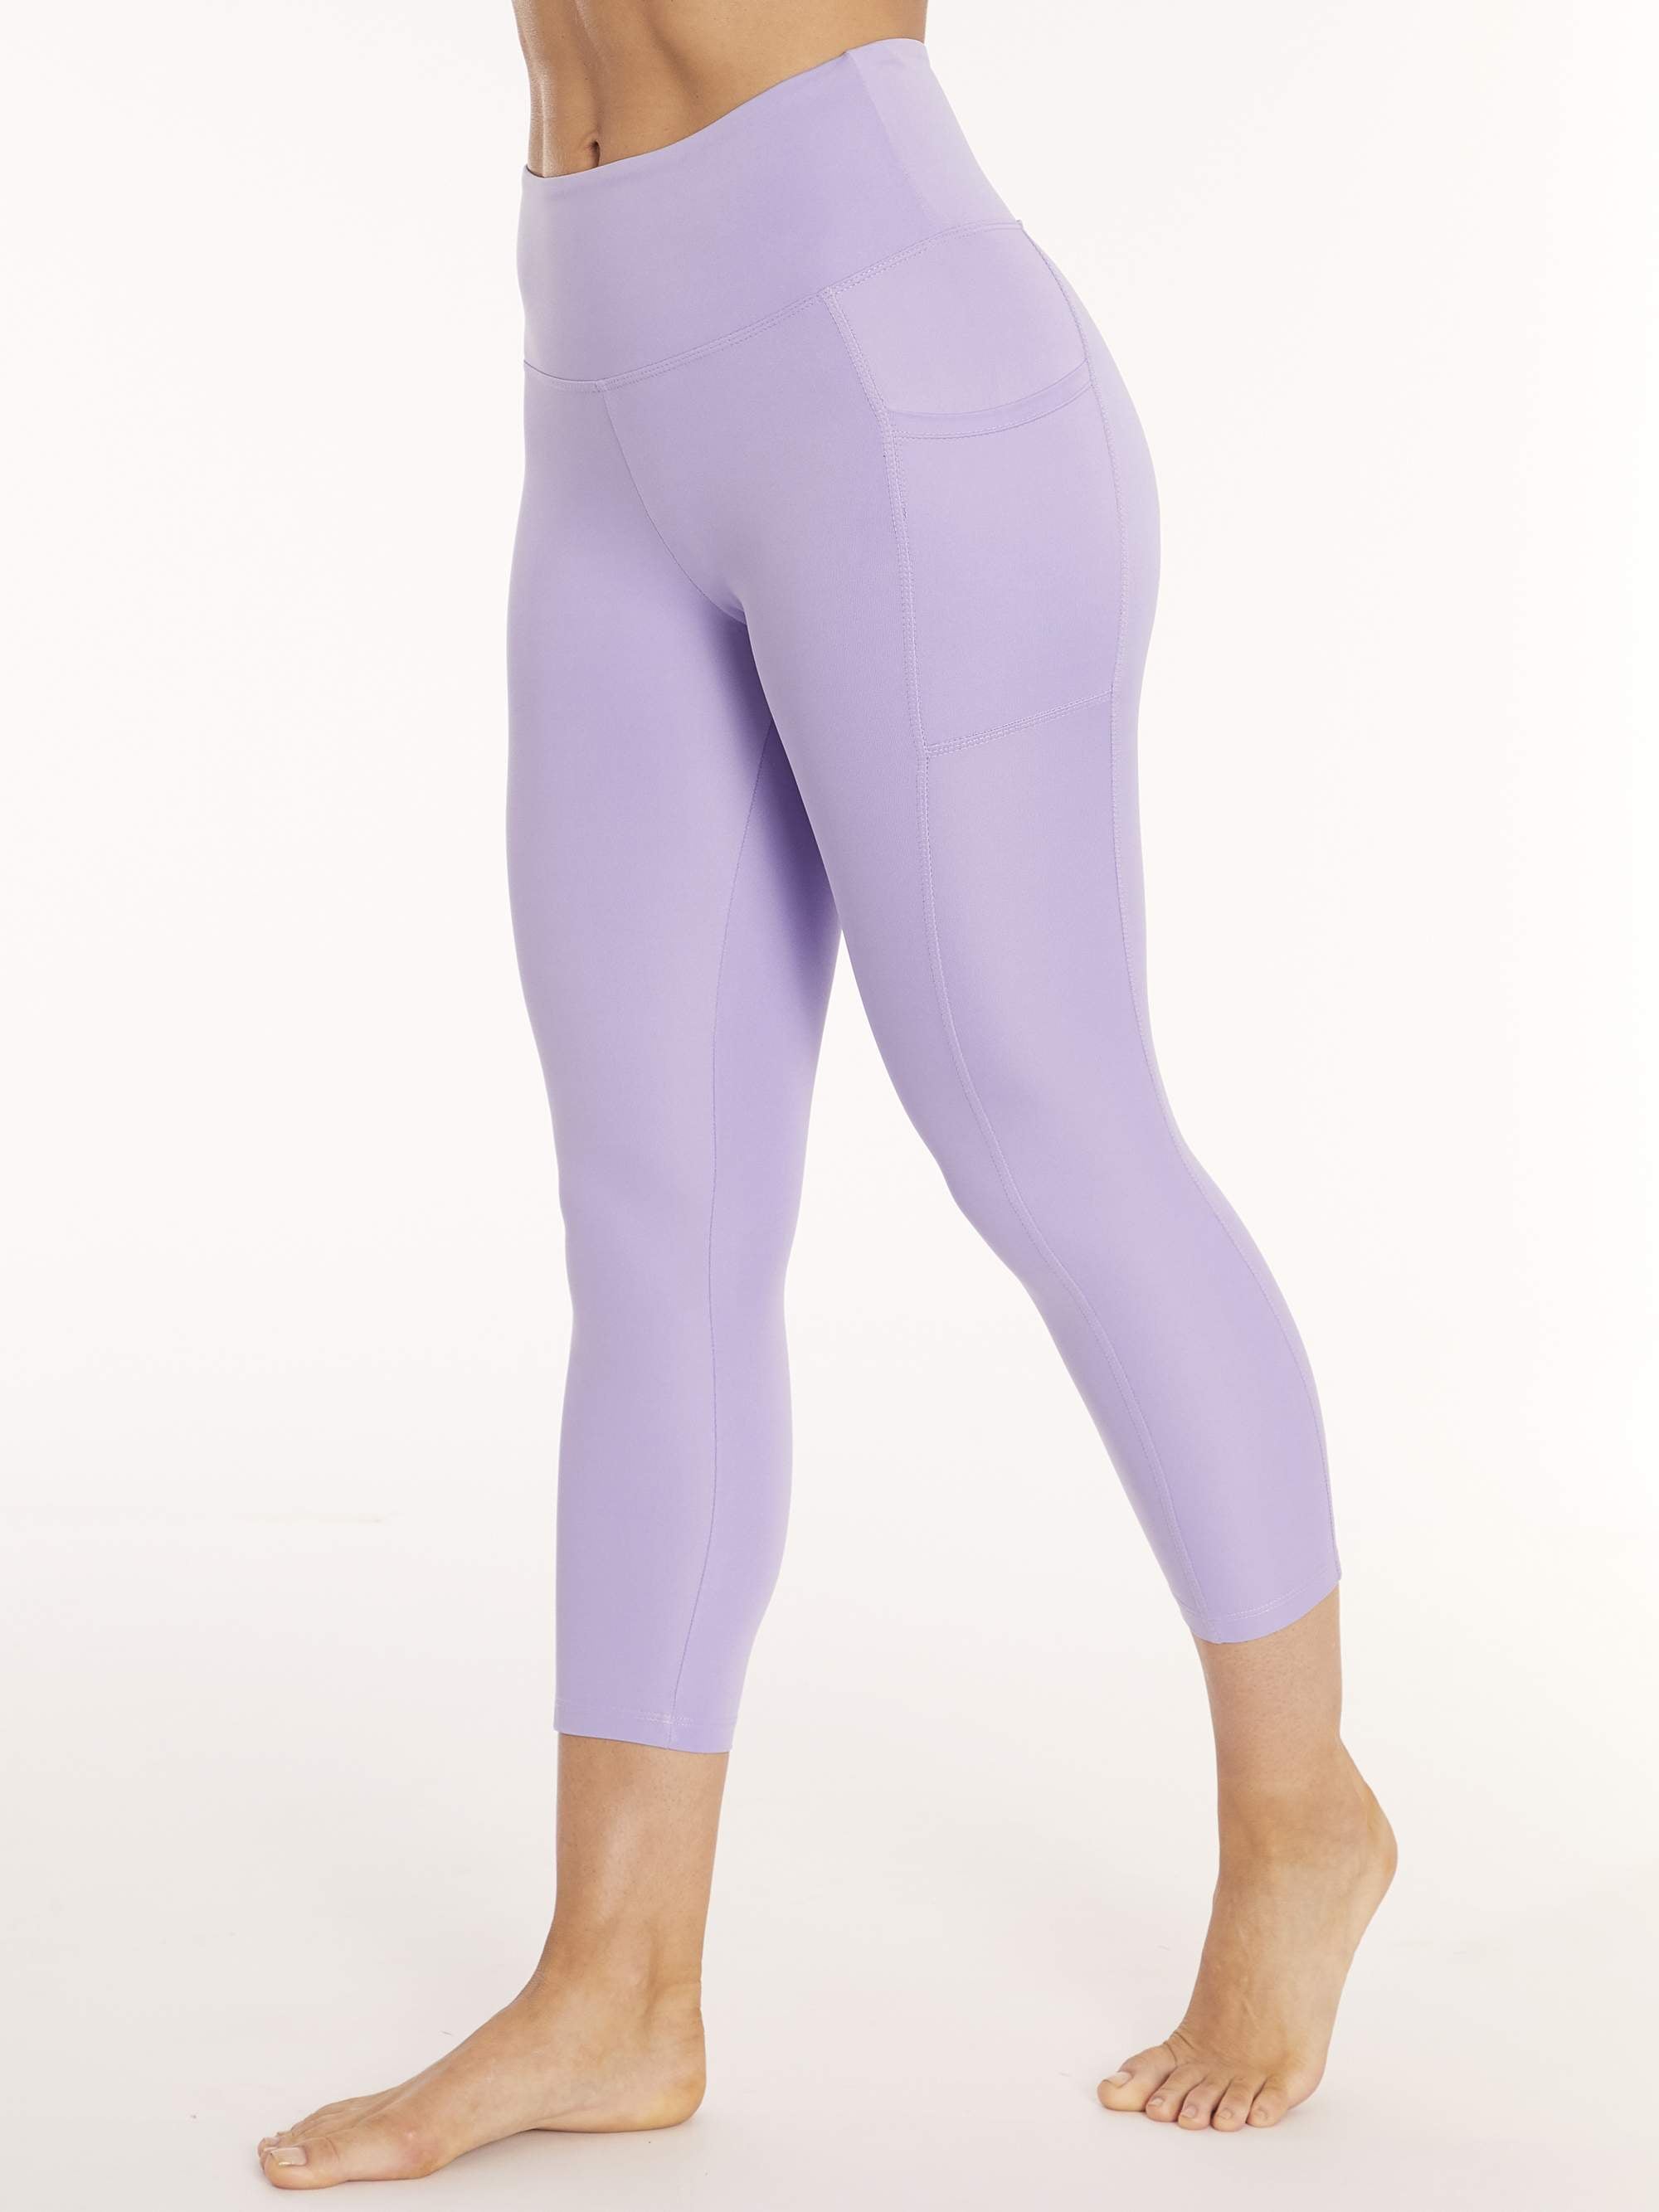 Bally Total Fitness Active Core High Rise Capri Leggings, Hands Down,  These Are the 50 Coolest Things You Can Buy at Walmart For $50 or Less